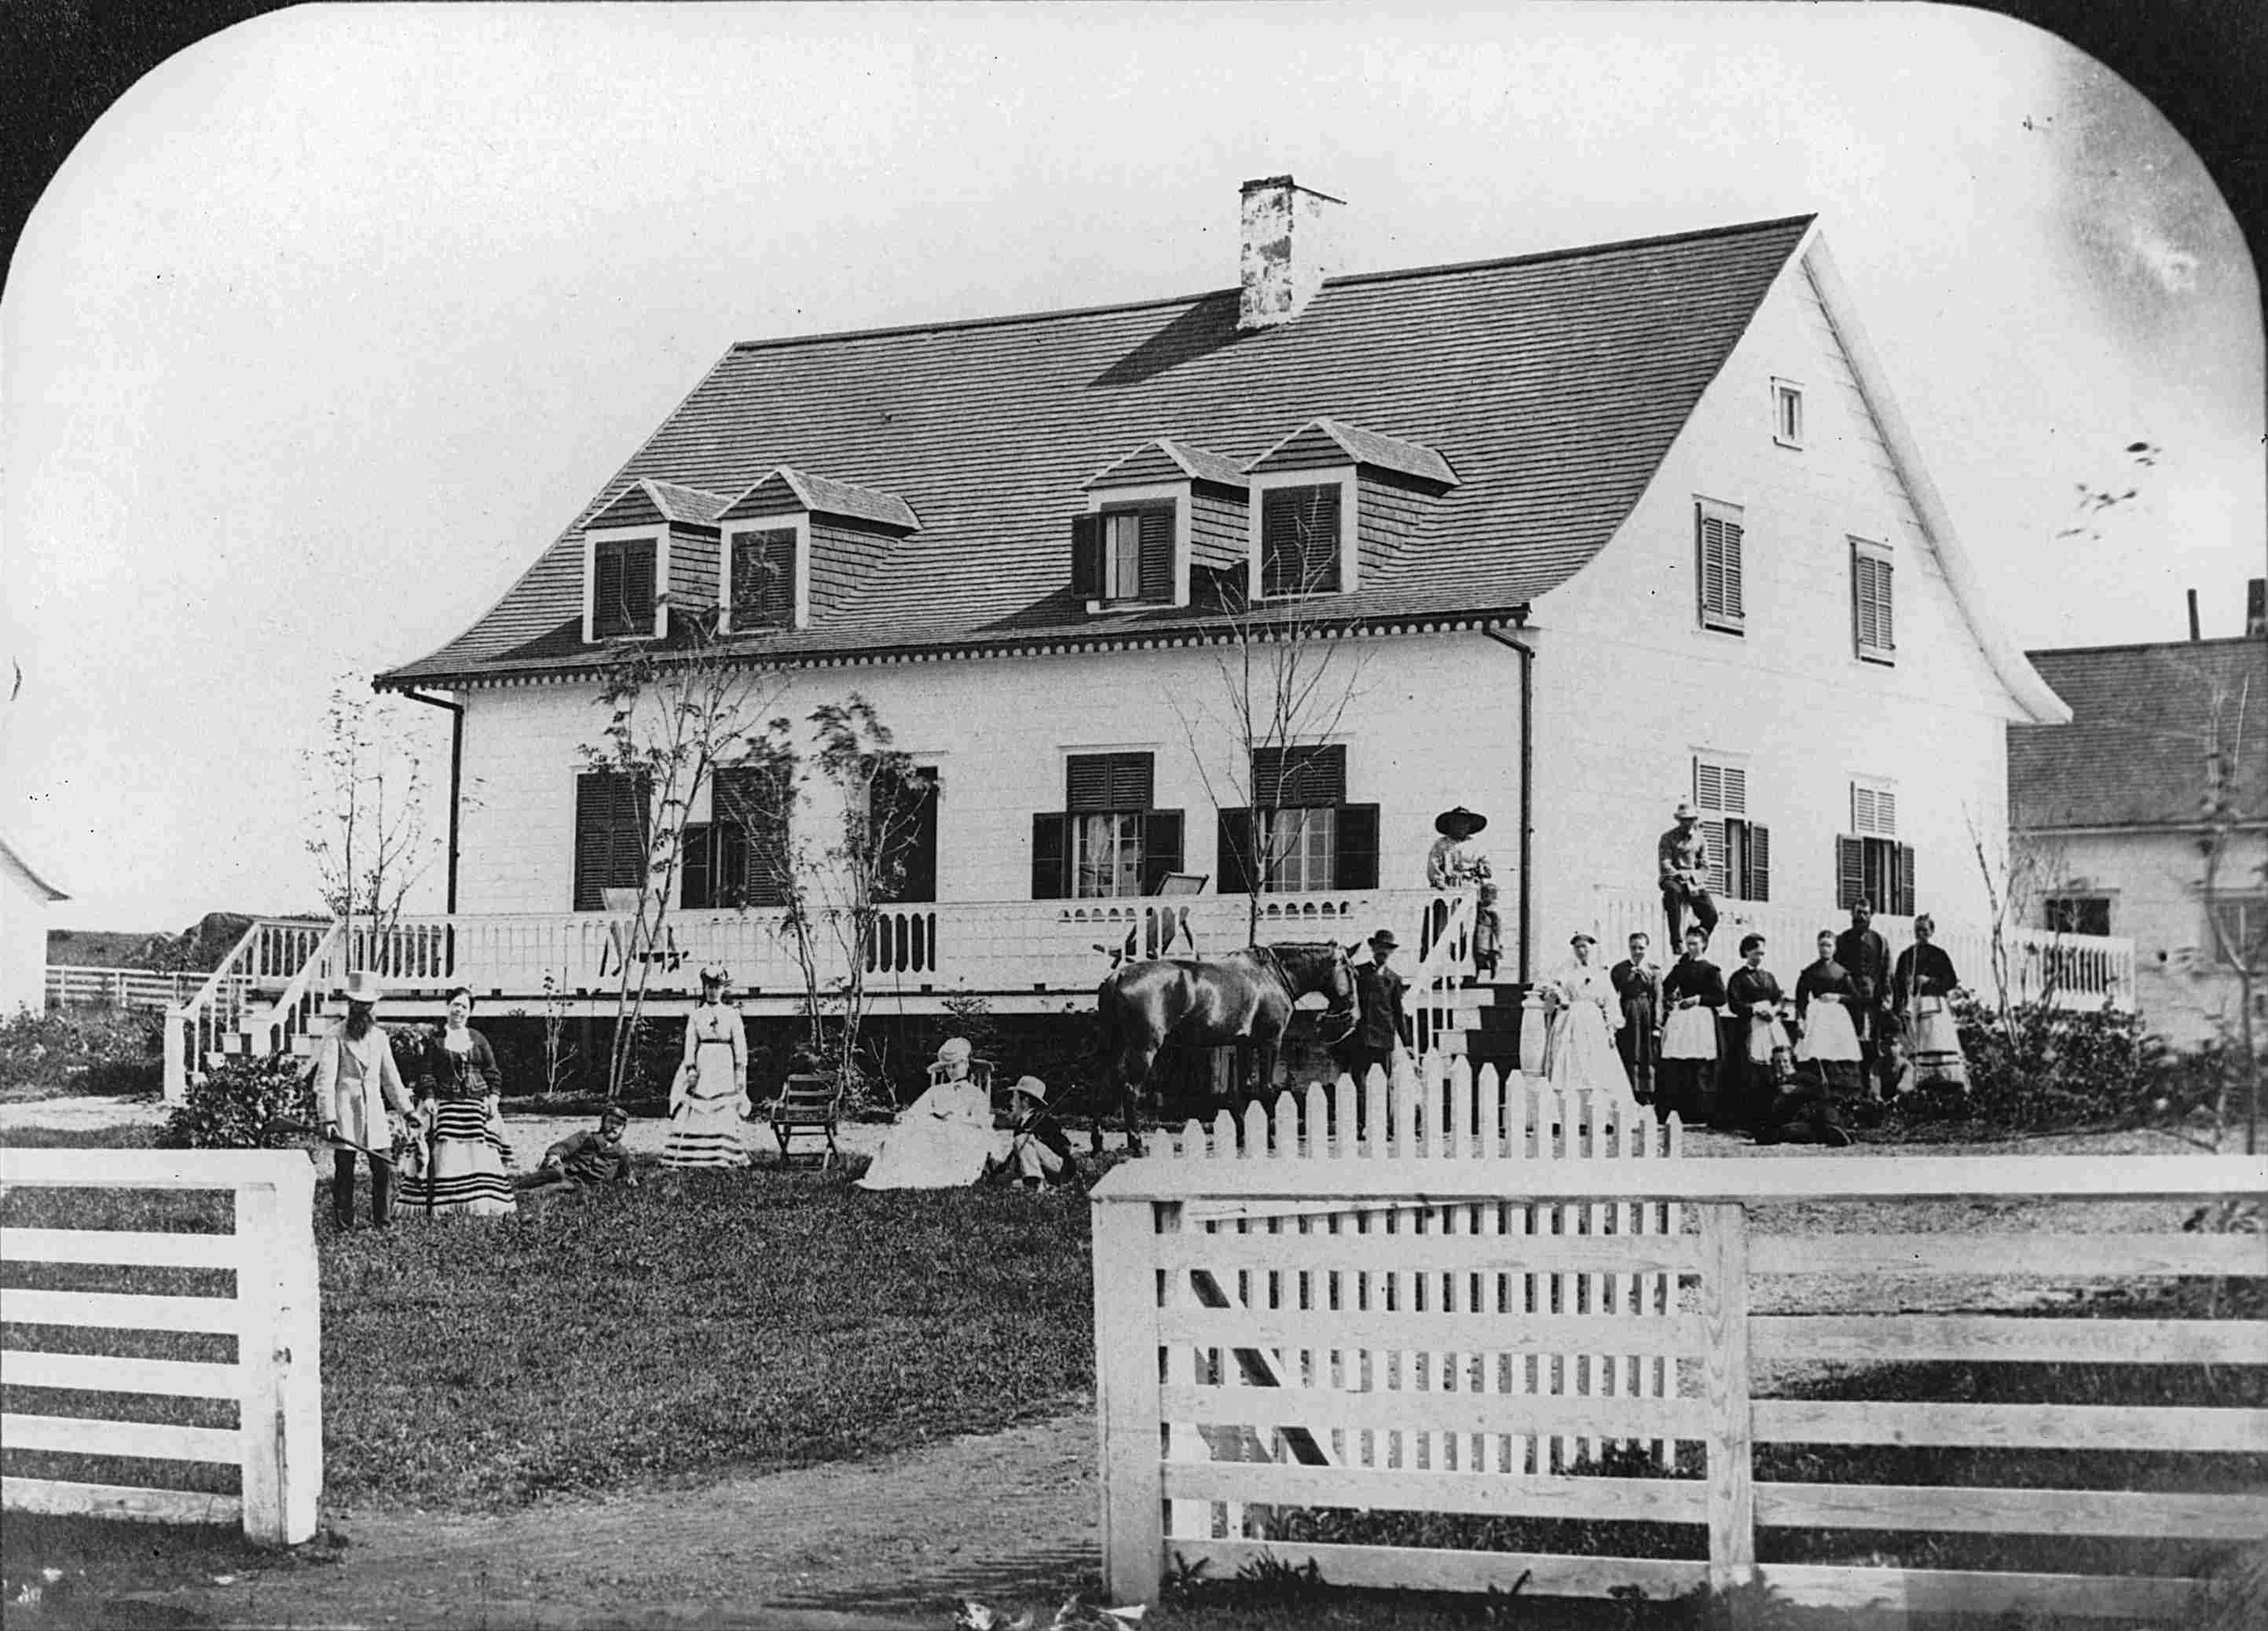 A group of fifteen people posing in front of an old country home.